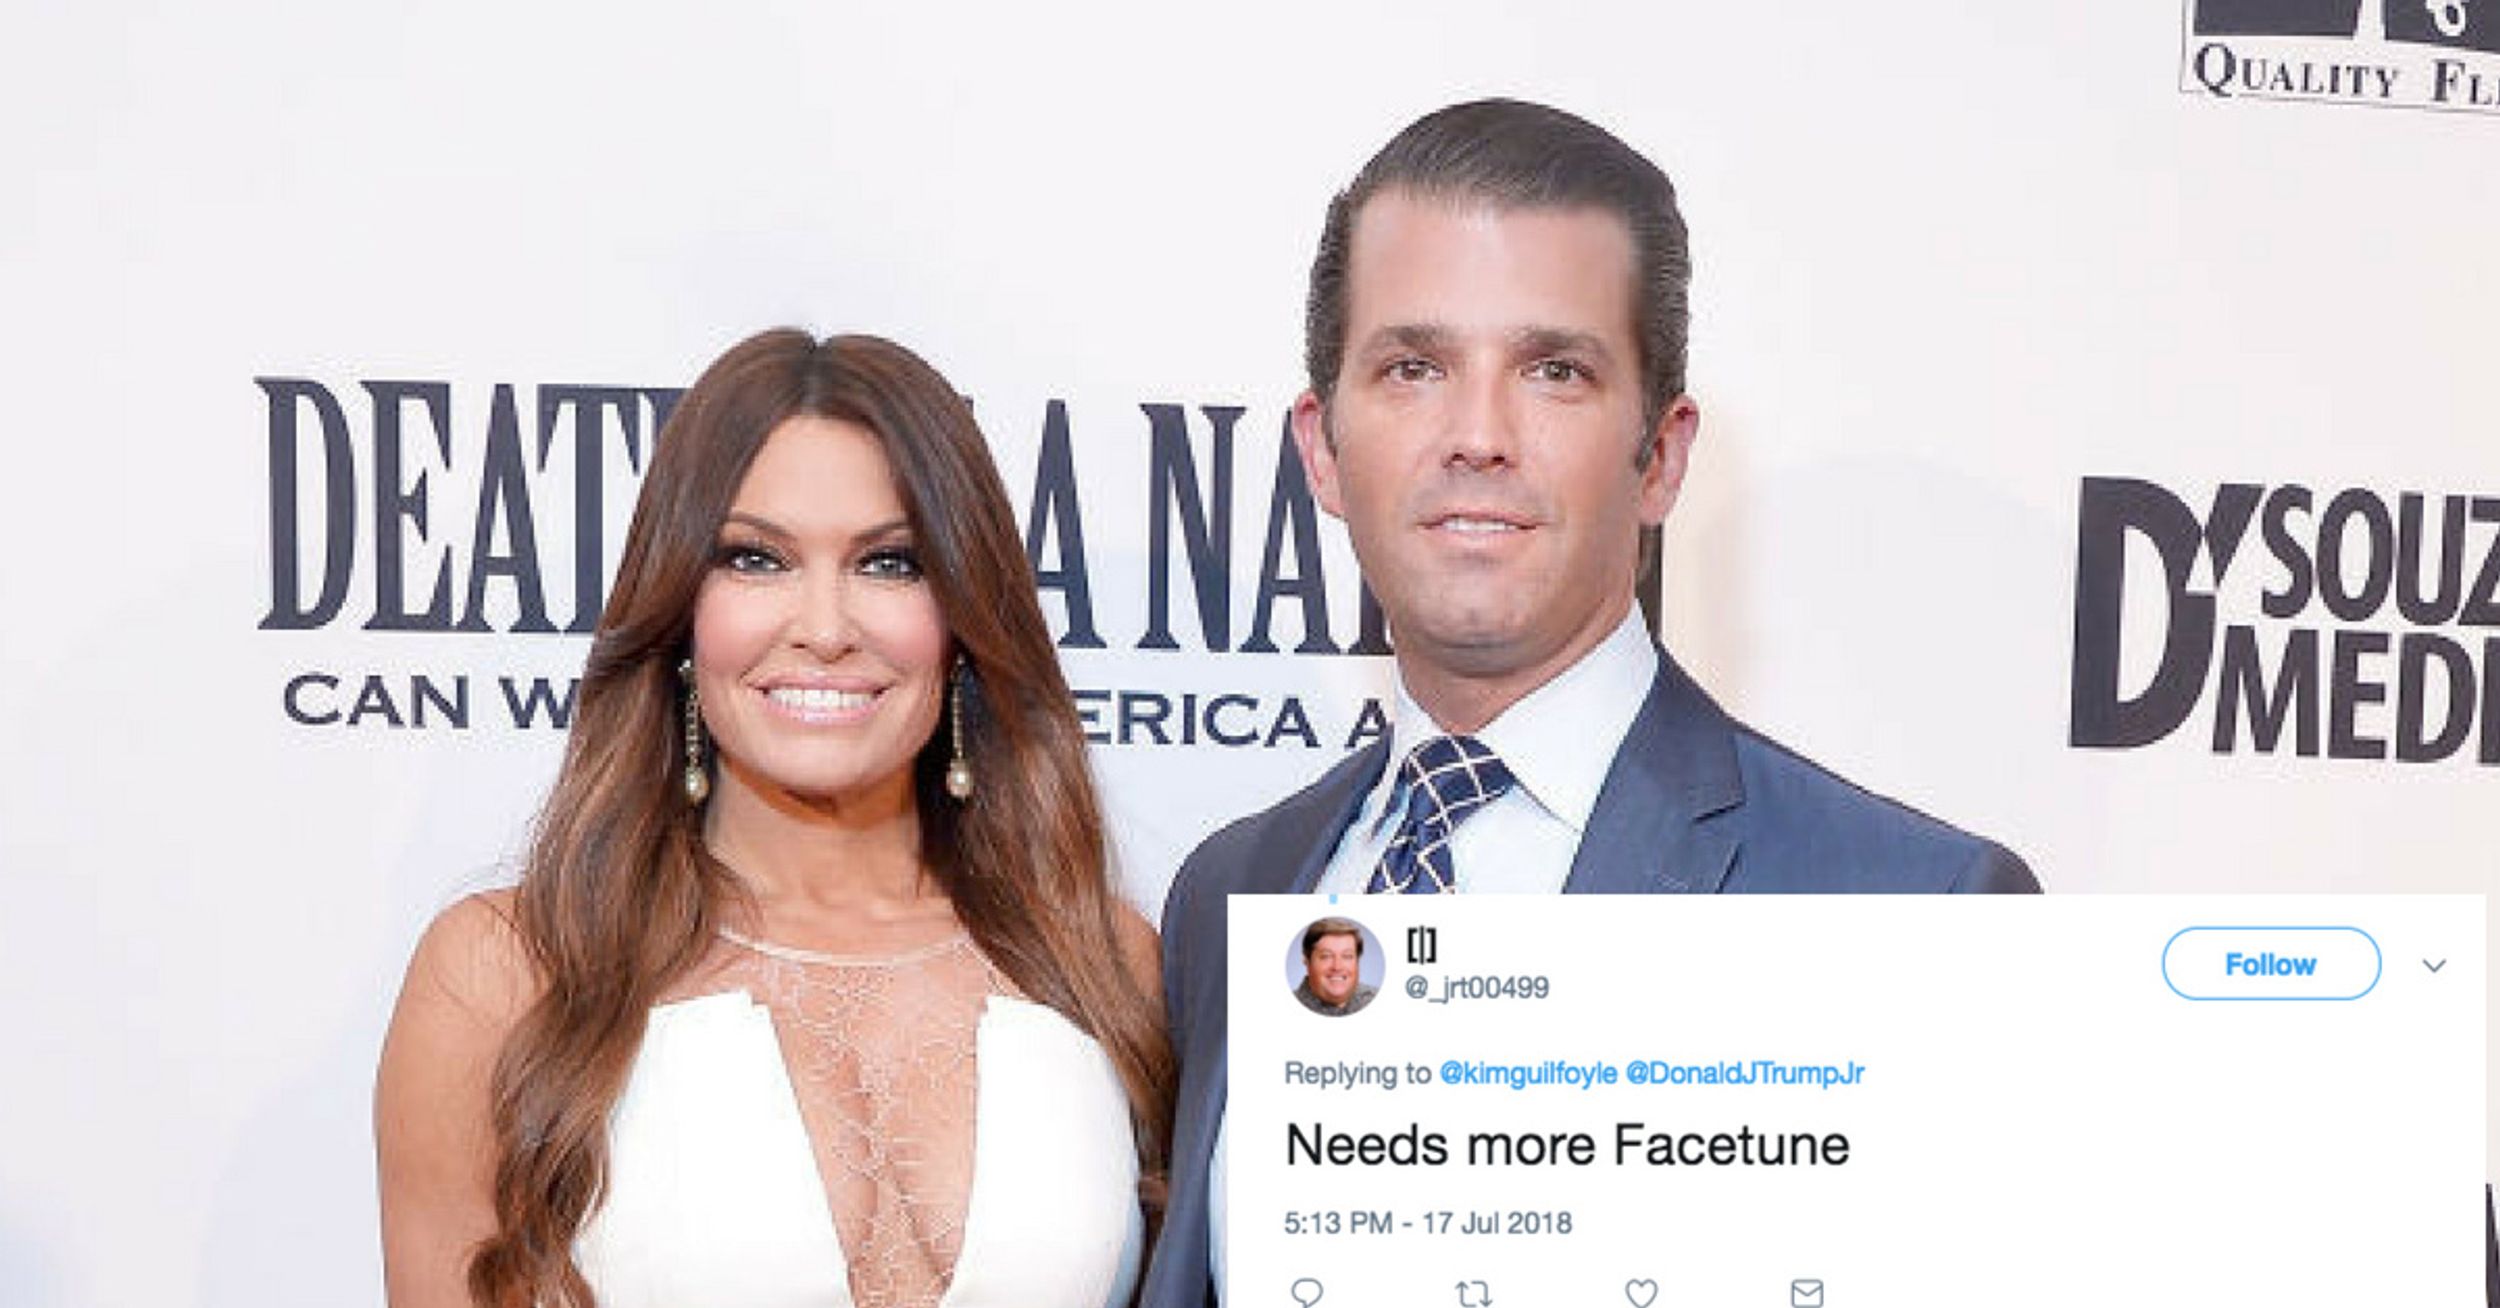 Airbrushed Photo Of Donald Trump Jr. And His New Girlfriend Gets Instantly And Savagely Meme'd 😂